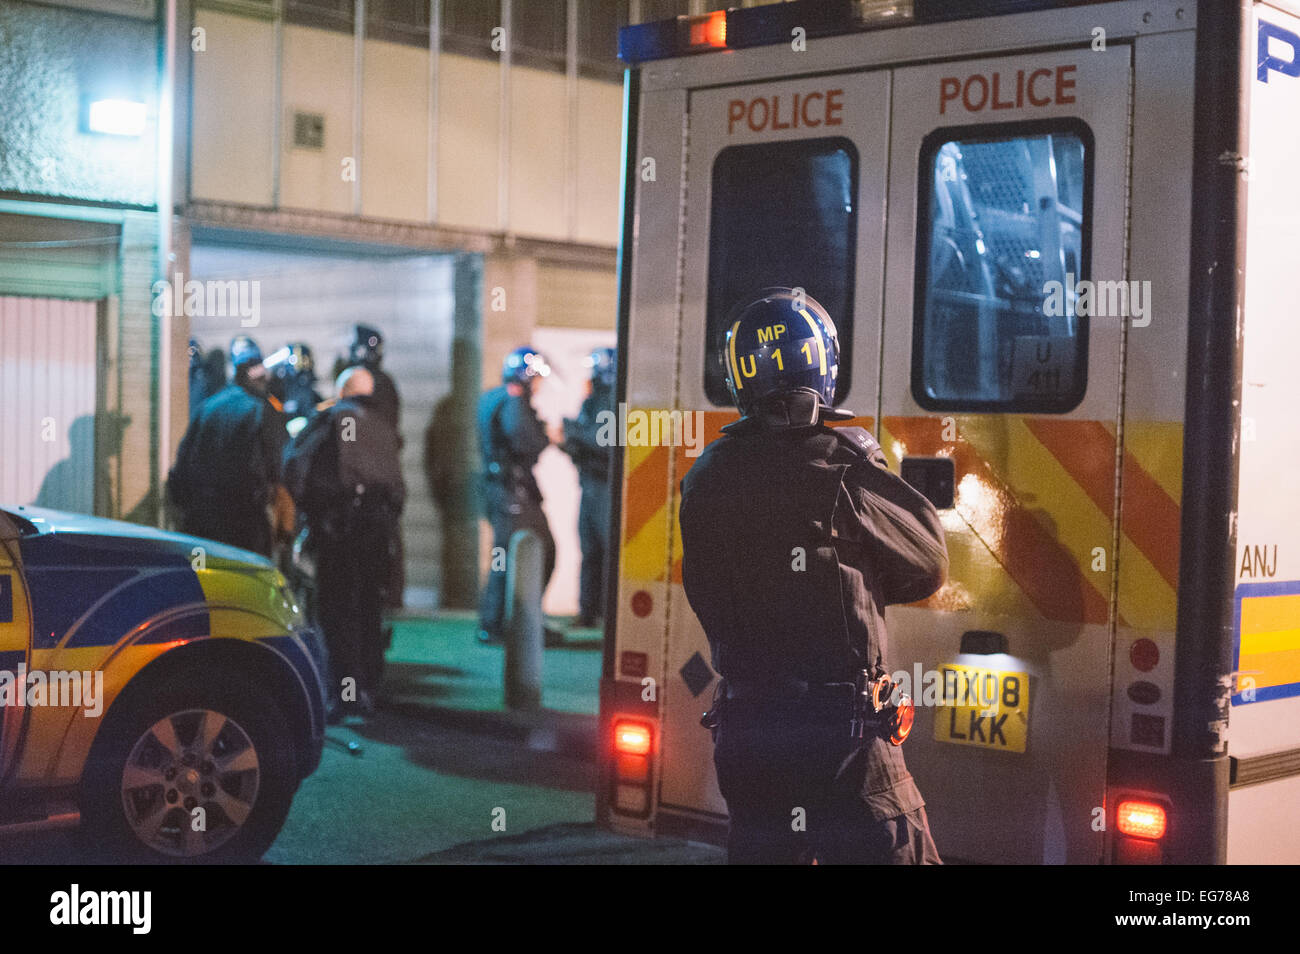 London, UK. 17th February, 2015. The eviction at Aylesbury Estate, 77 – 105 Chartridge, Westmoreland Road on 17th February 2015 of housing activists on one of europe's largest Estates.  Protesters gathered as police in riot gear cut down barricades and make arrests. Credit: Richard Skinner/Alamy Live News Stock Photo